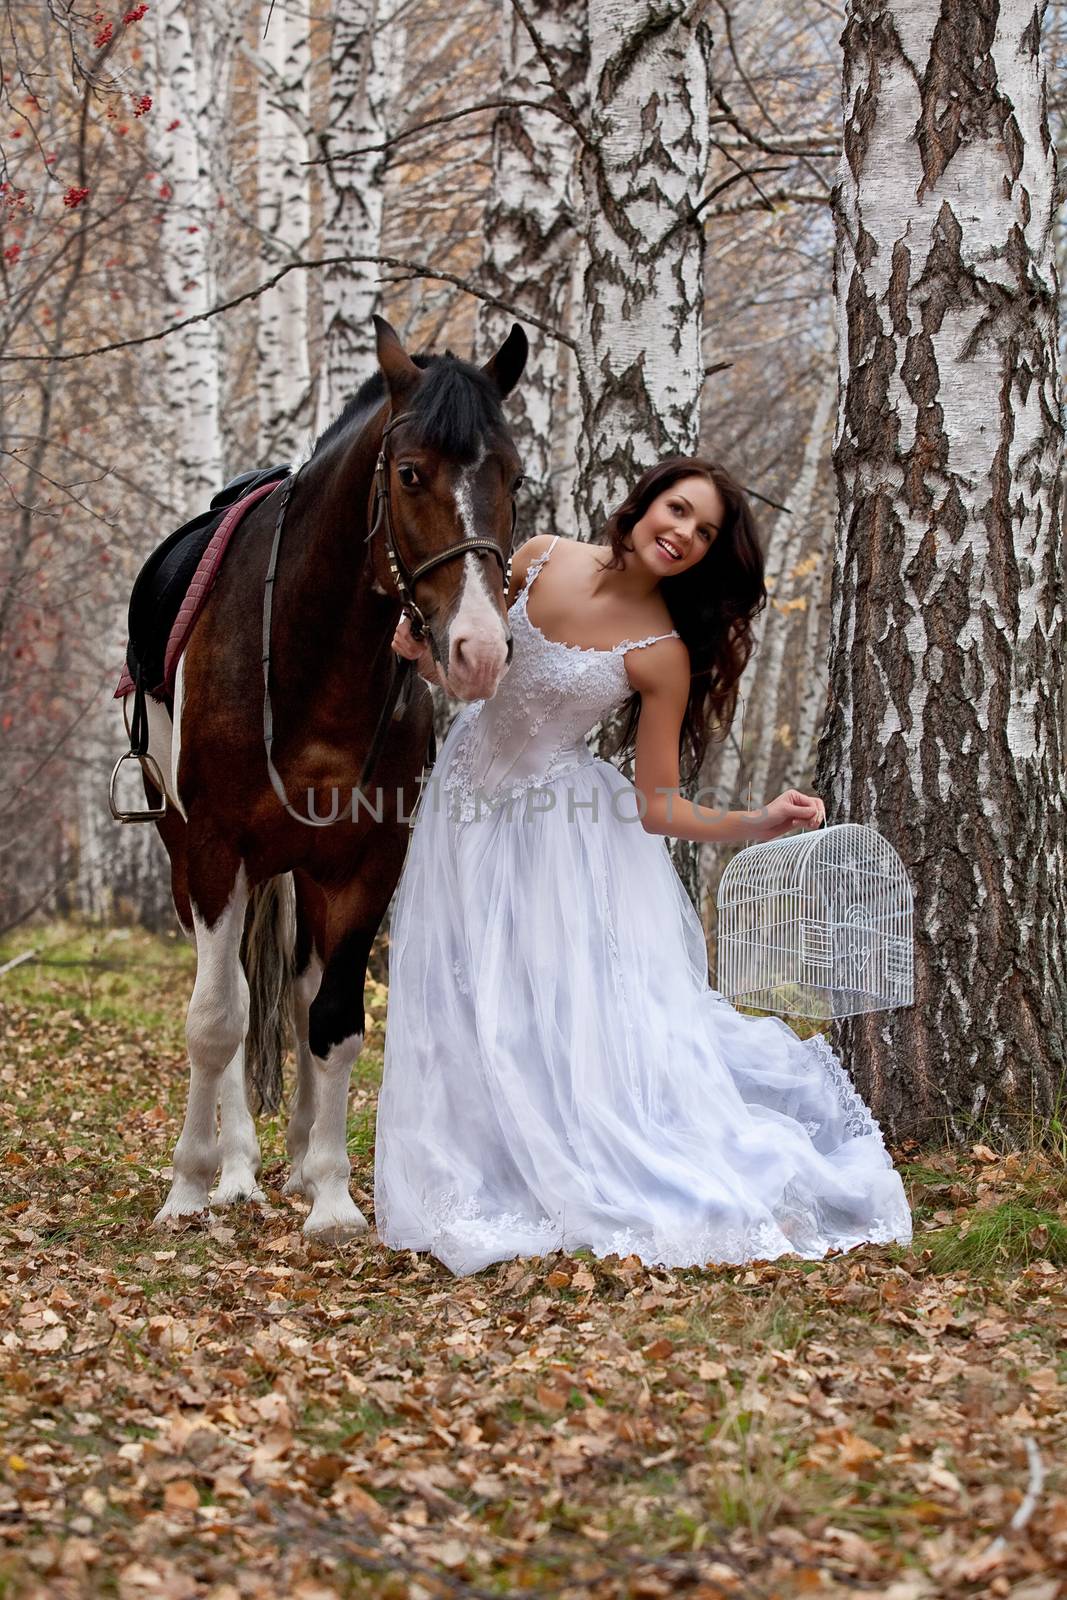 Young Woman And Horse by Fotoskat